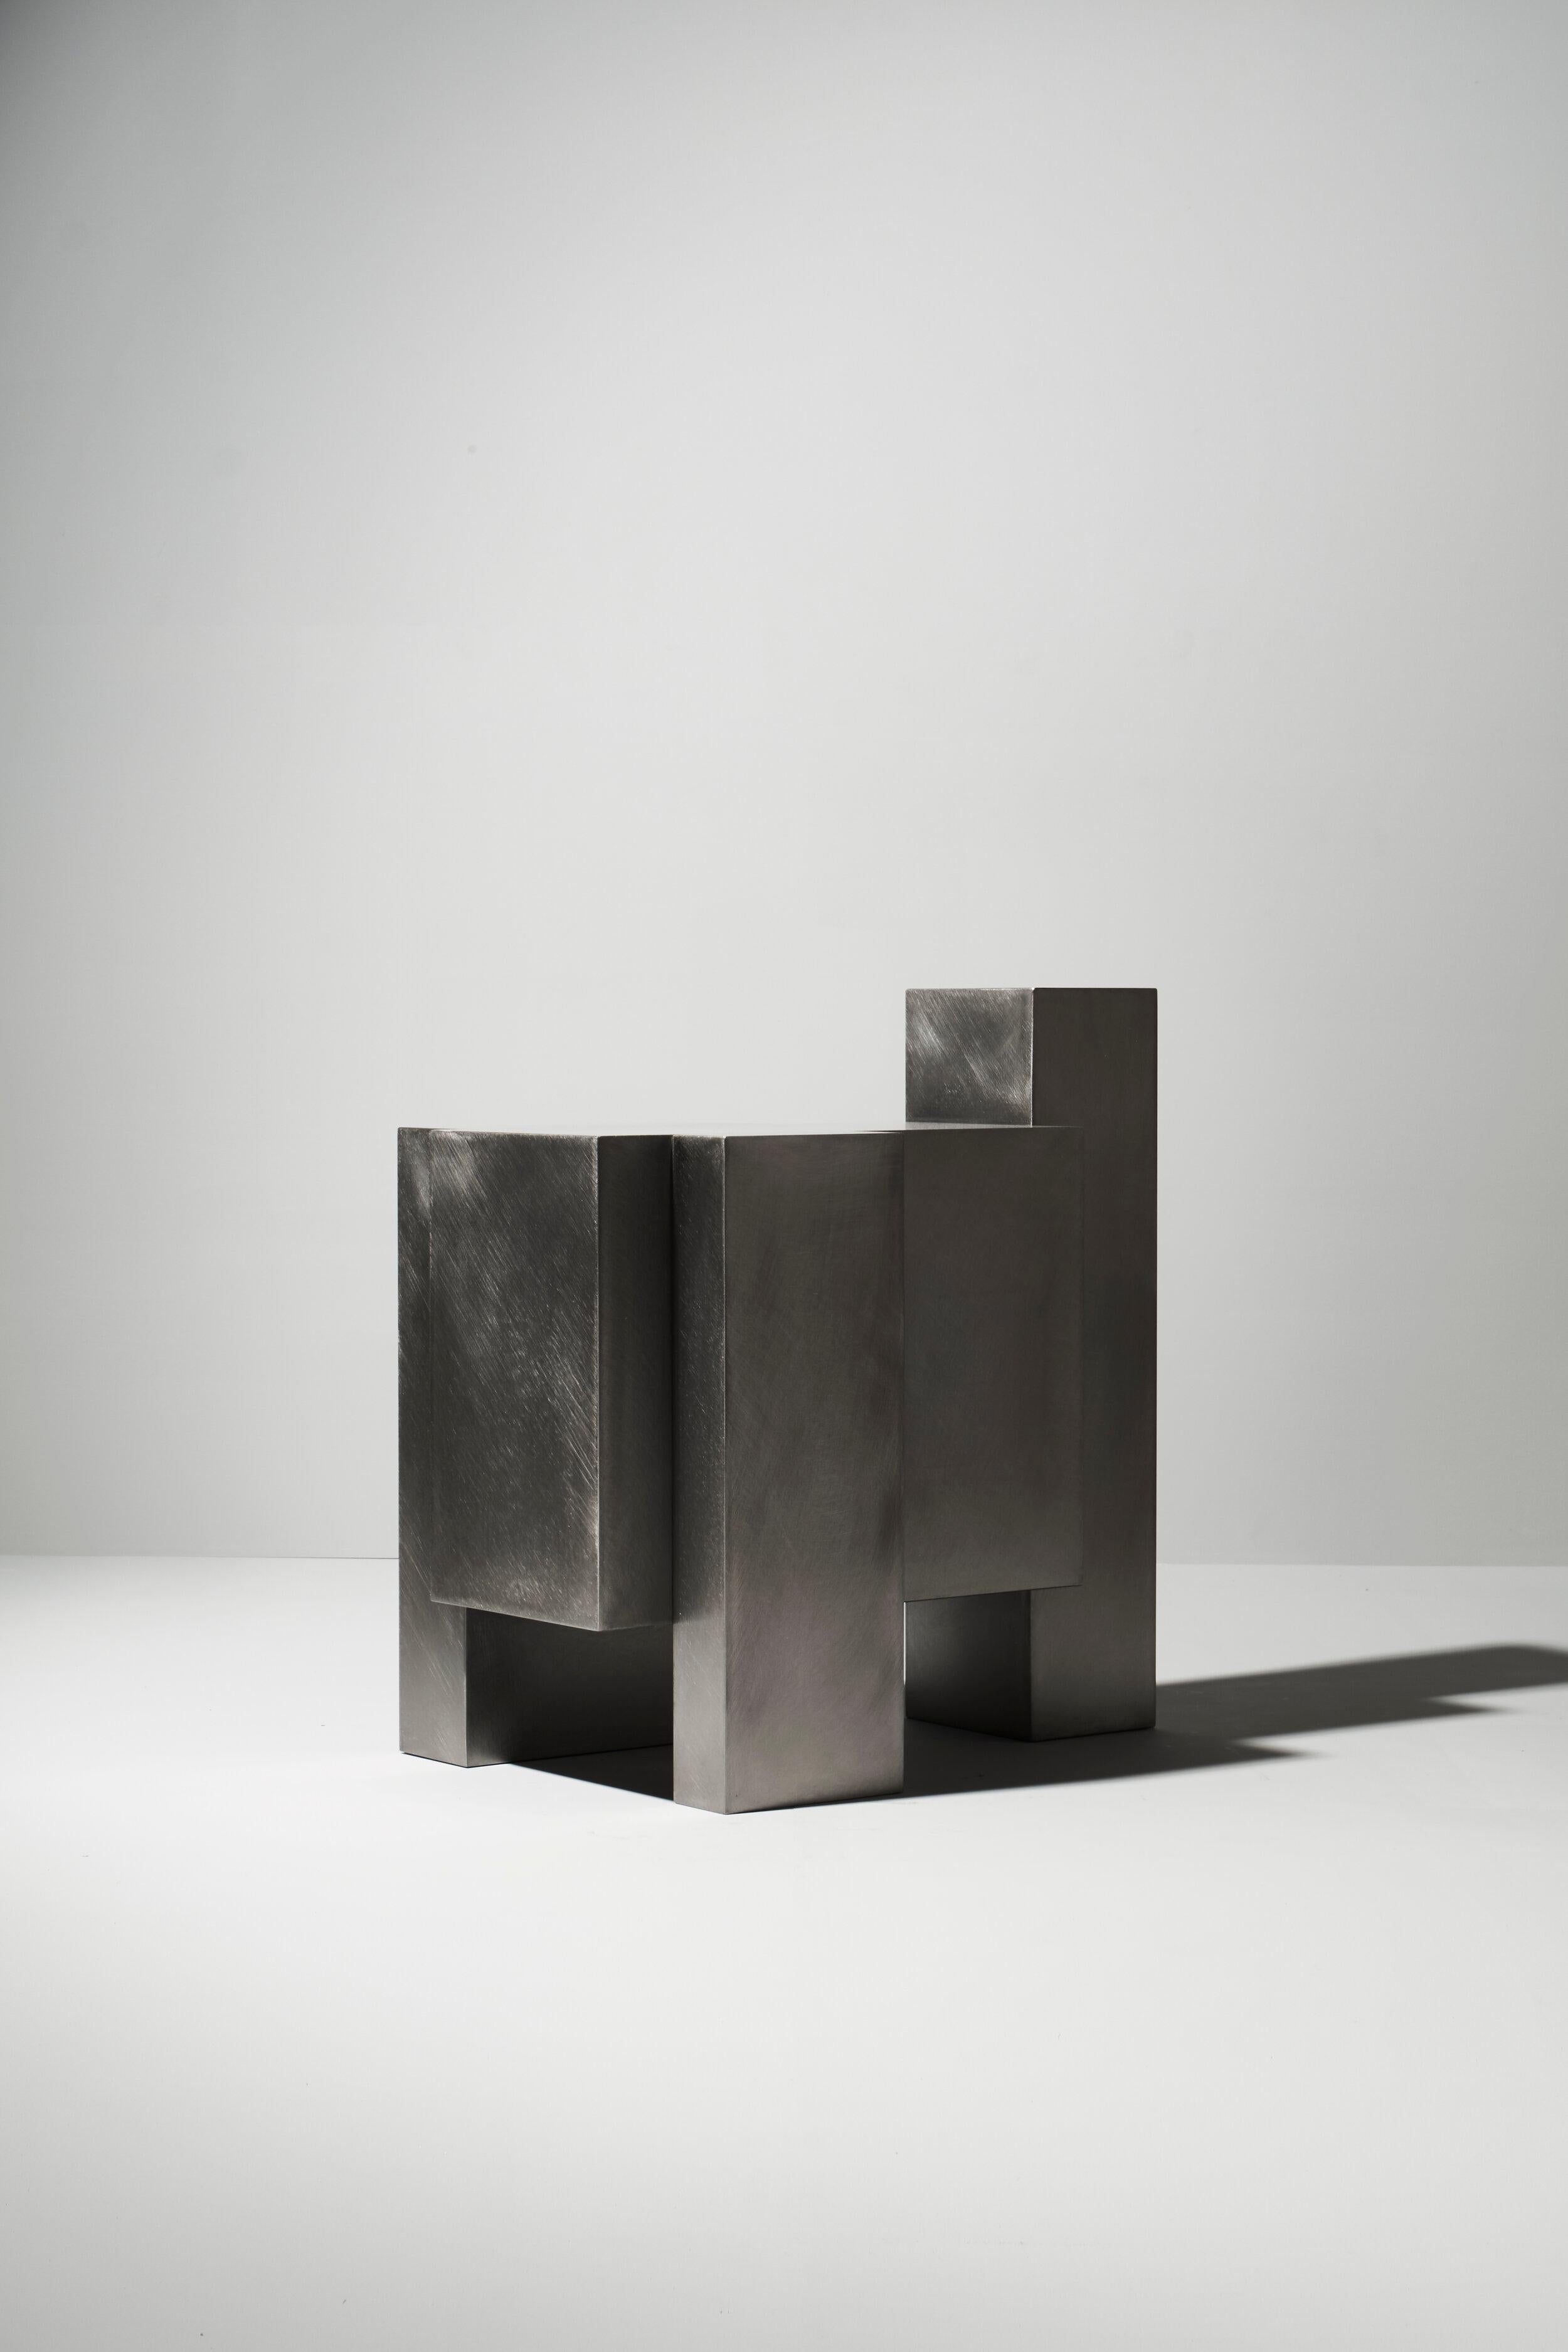 Layered steel seat XI by Hyungshin Hwang
Dimensions: D 36 x W 54 x H 54 cm
Materials: stainless steel

Layered Series is the main theme and concept of work of Hwang, who continues his experiment which is based on architectural composition of